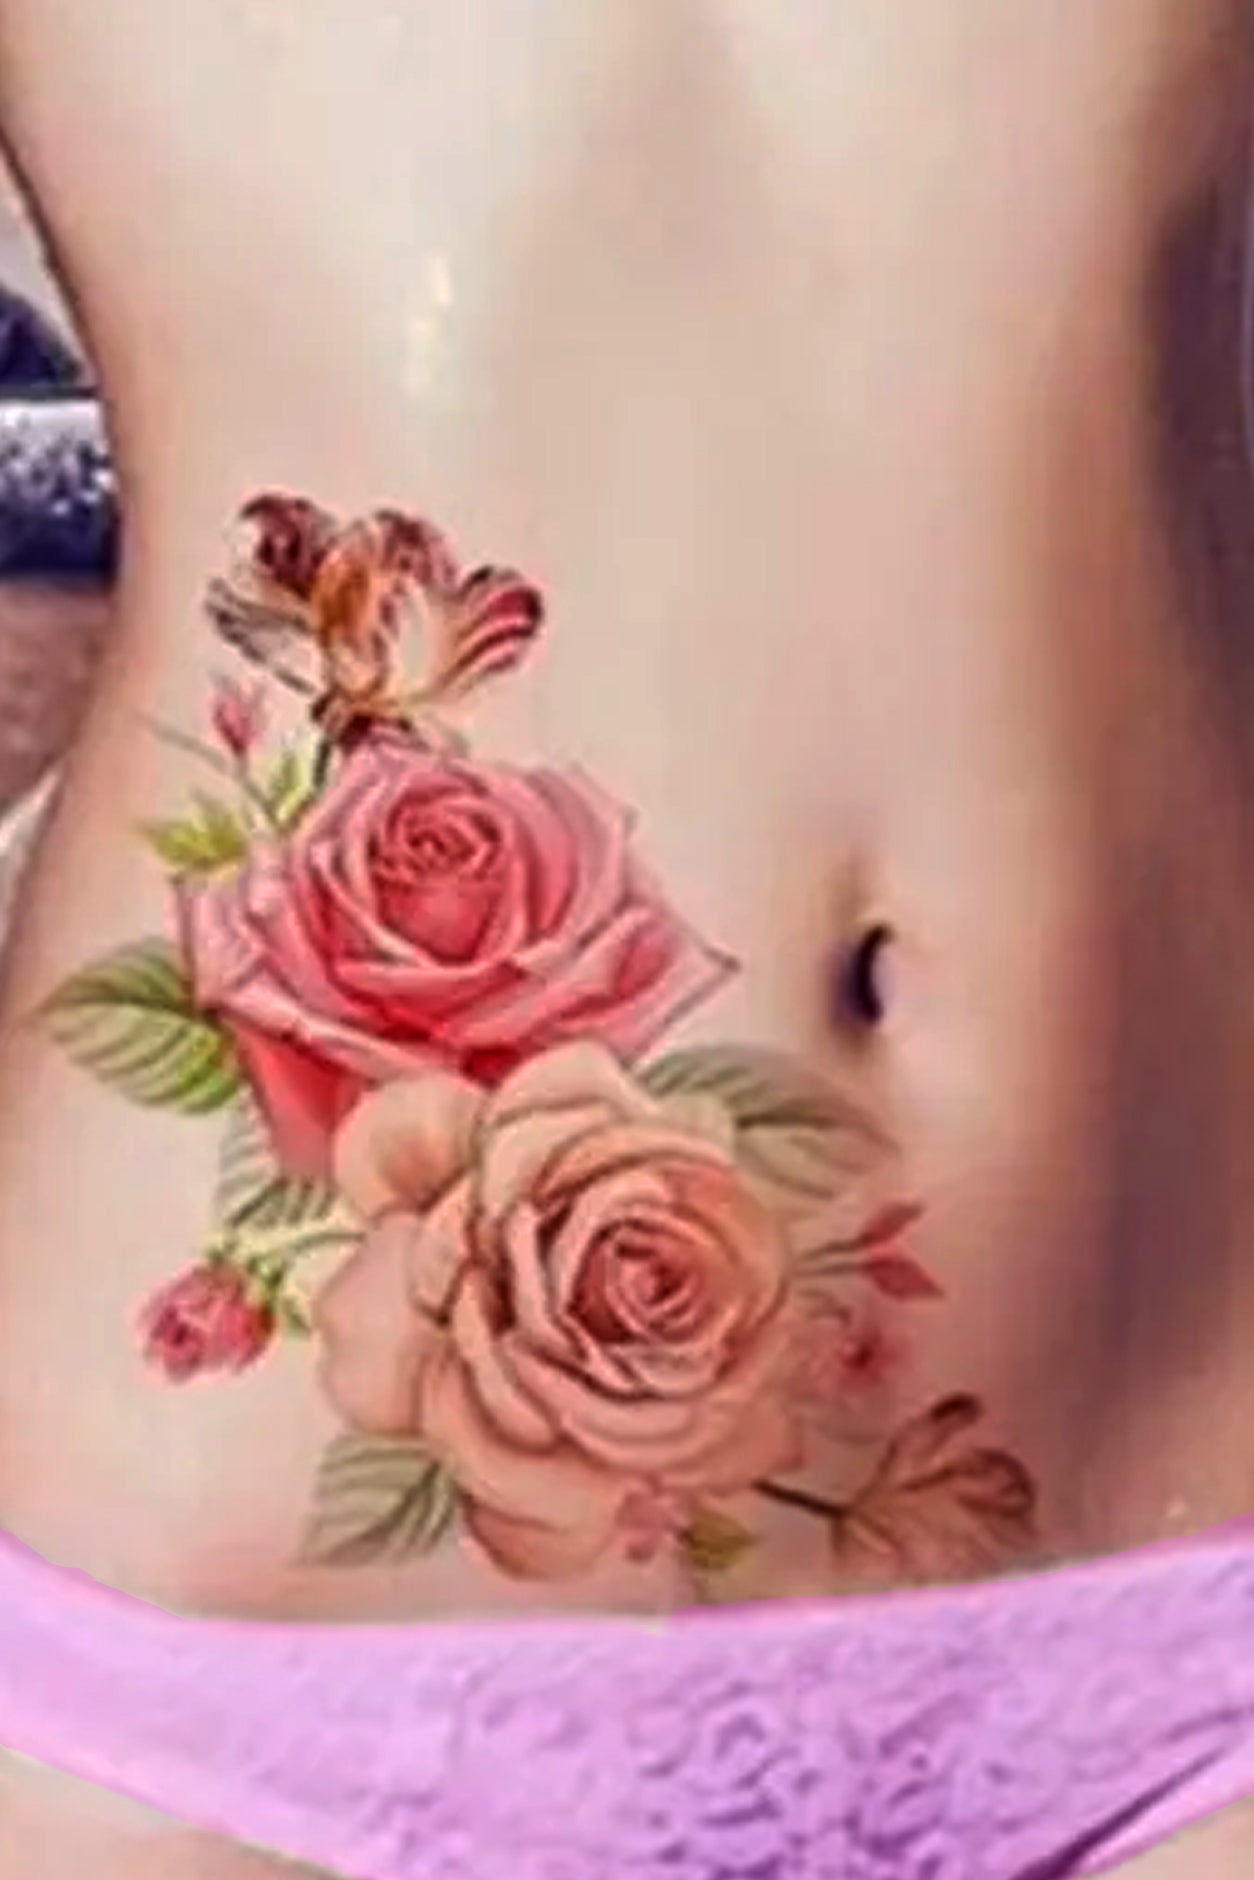 A girl displays her torso with roses. A delicate bouquet of lifelike pink and deep pink roses will beautify your arm, leg, torso, hip, or chest. The delicate rose capture light and shadow just right, the spray has tiny buds and leaves in the background at the right juxtaposition.